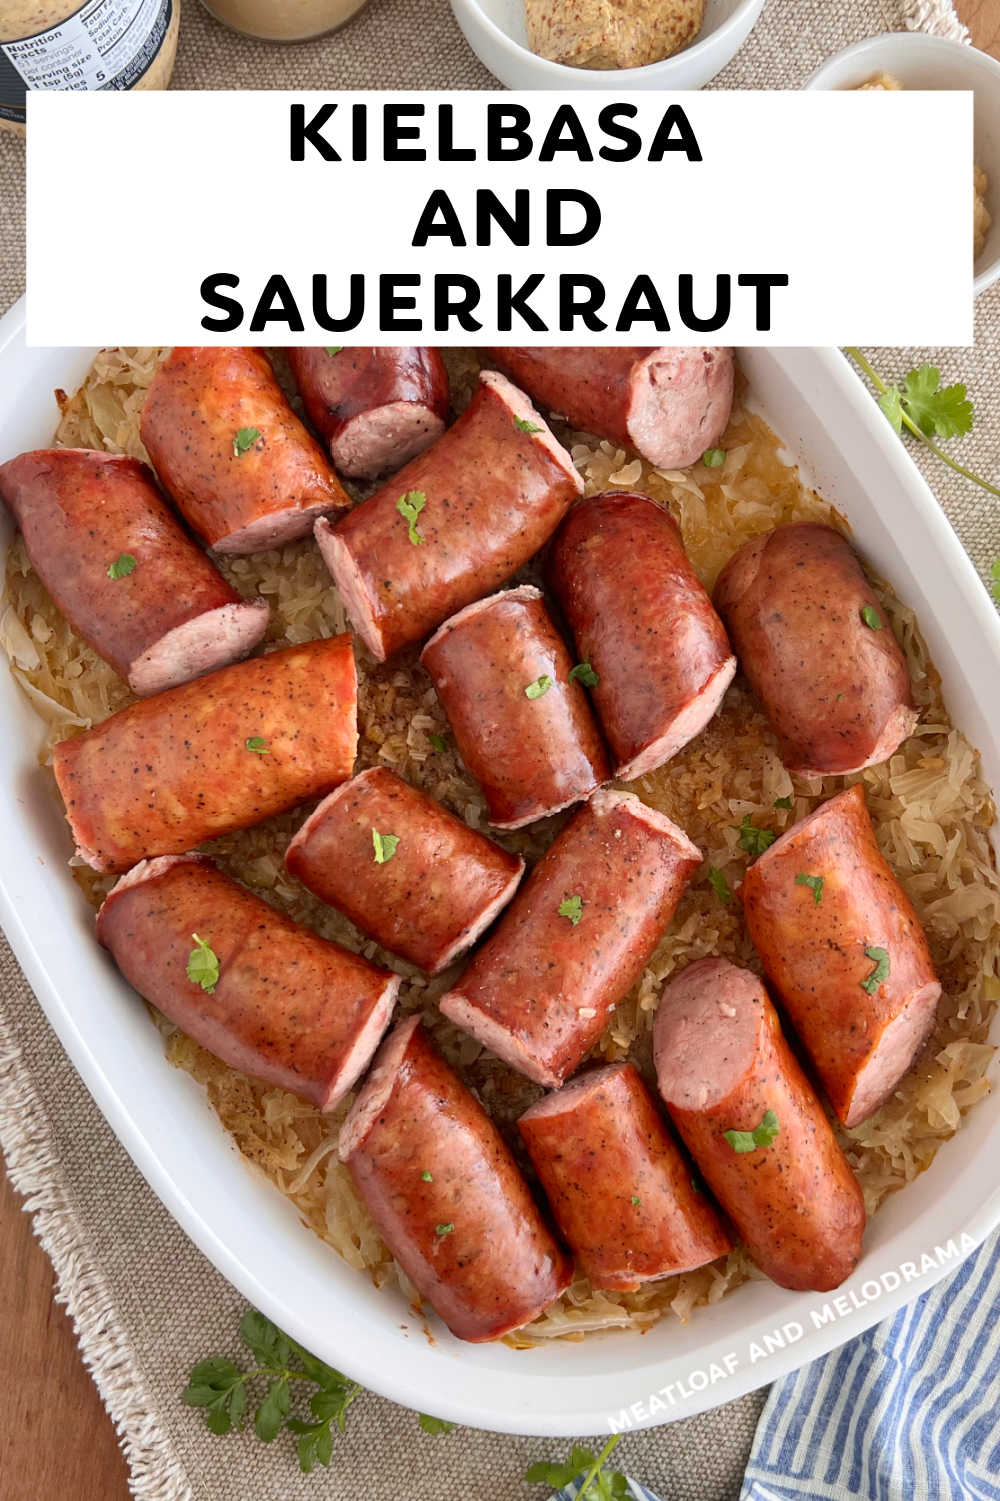 Grandma's Kielbasa and Sauerkraut recipe is an easy dinner made with smoked sausage and seasoned sauerkraut baked until hot and delicious. Your whole family will love this budget friendly meal, and it's easy enough for busy weeknights! via @meamel